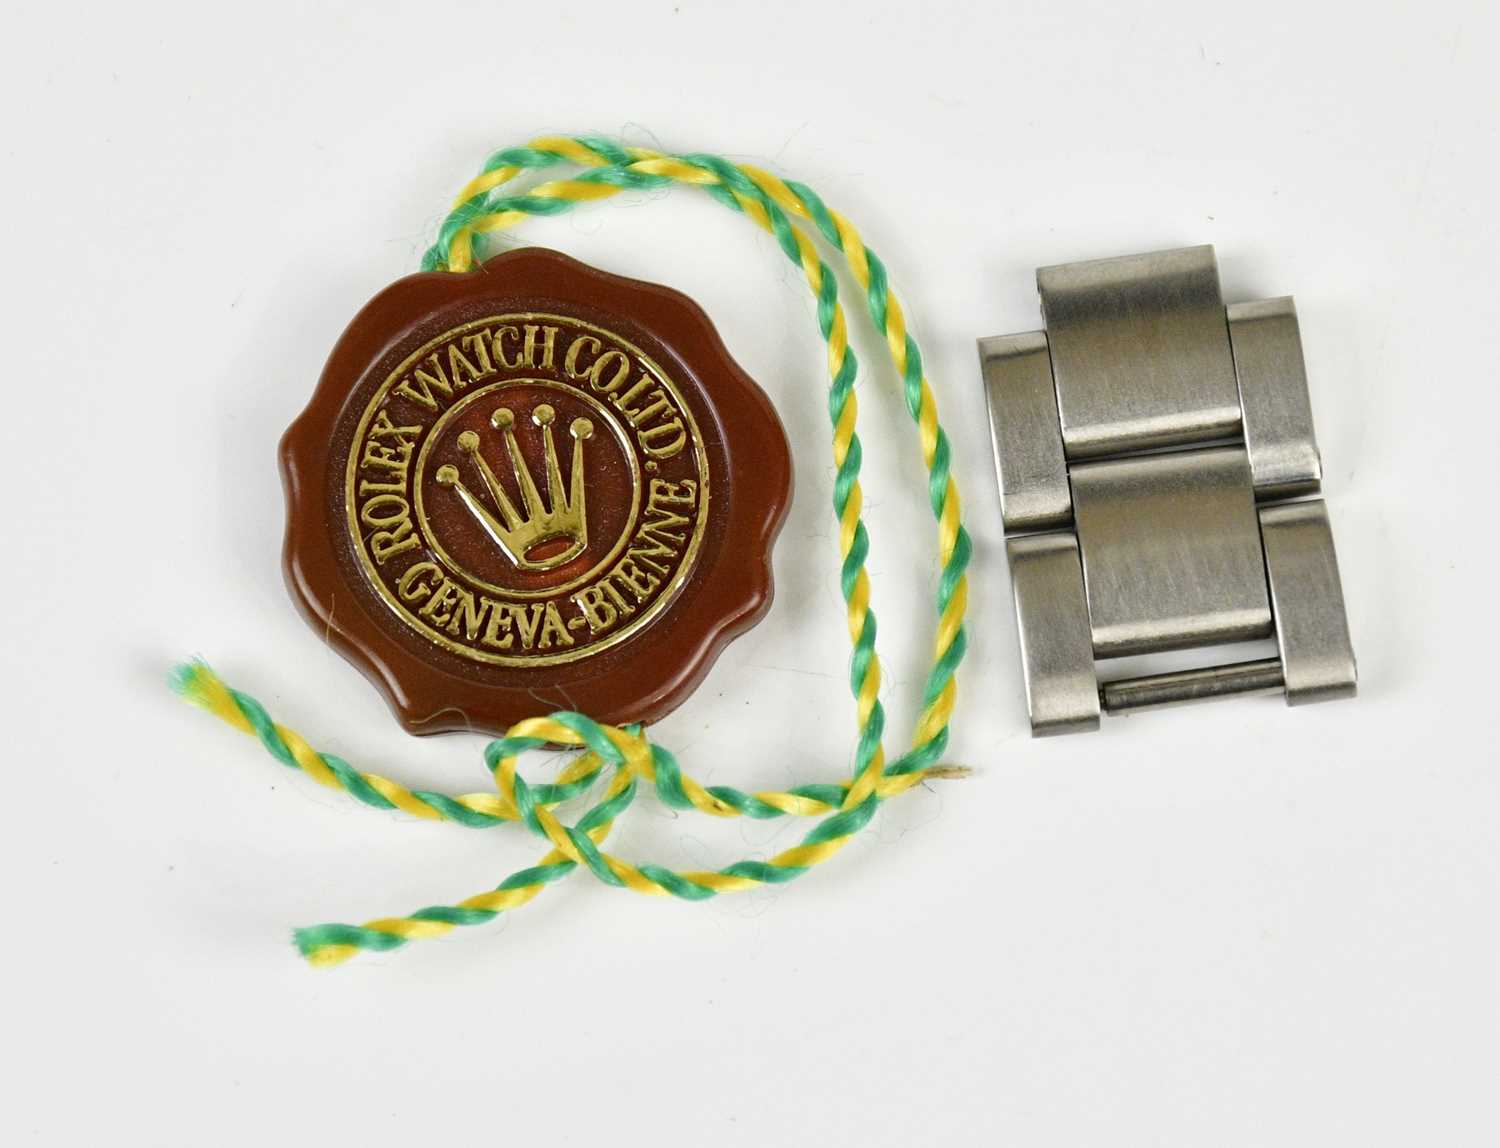 Two stainless steel links purportedly from a Rolex Explorer II, with tie-on tag.